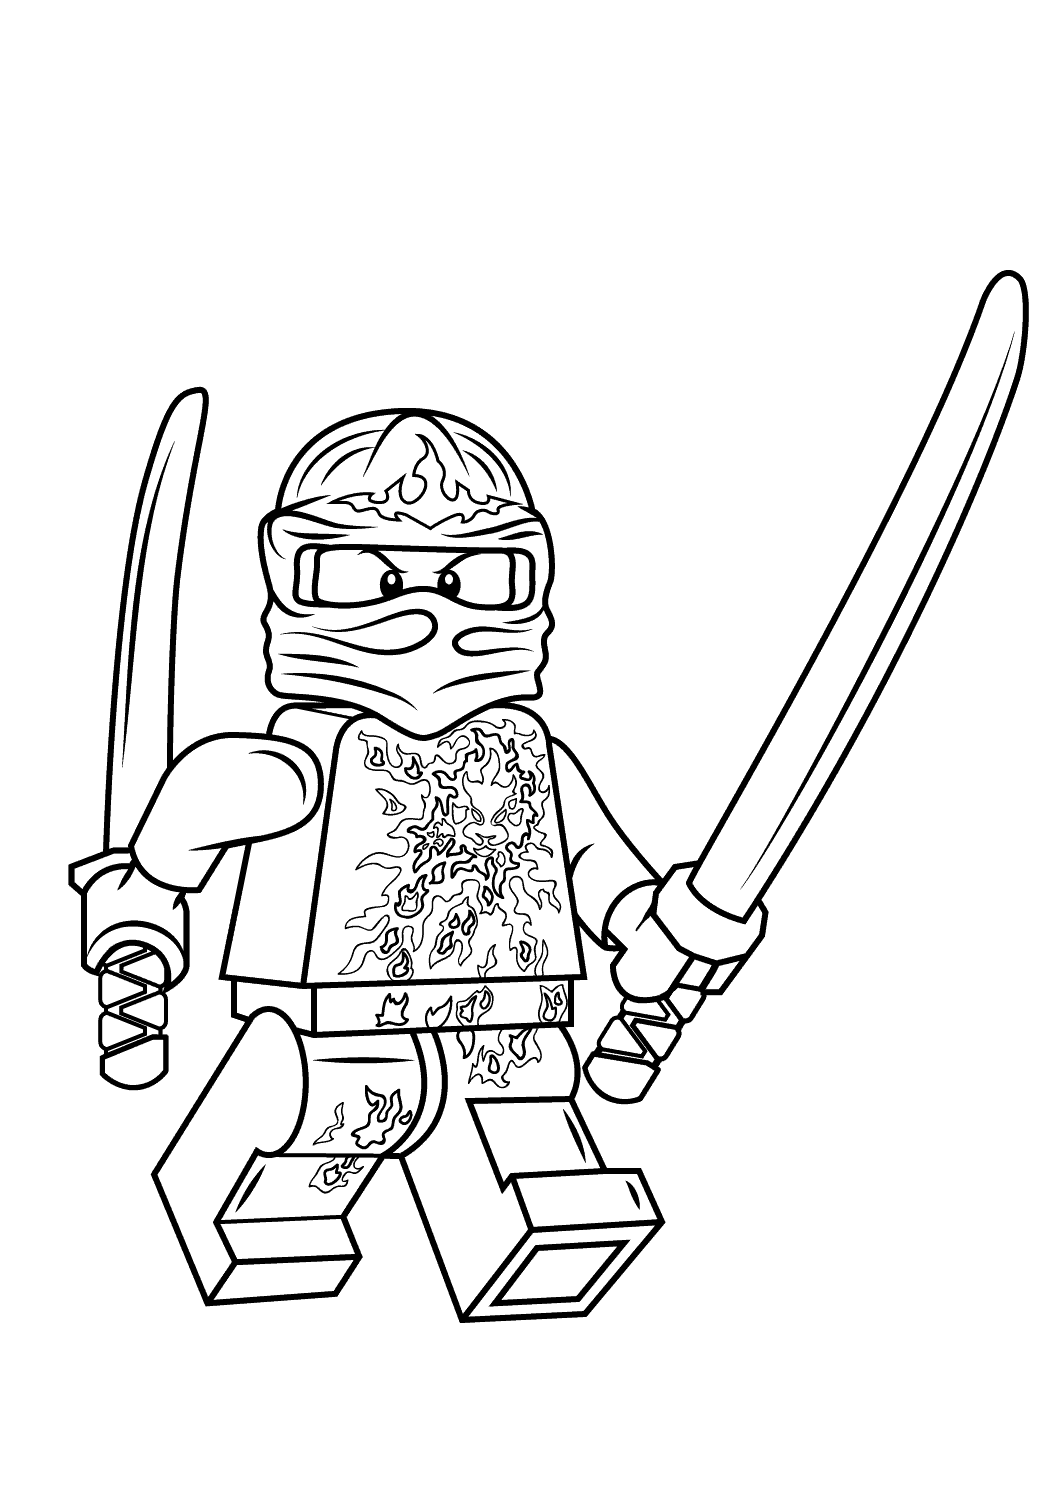 Kai from Ninjago holds Golden swords on his hands Coloring Pages